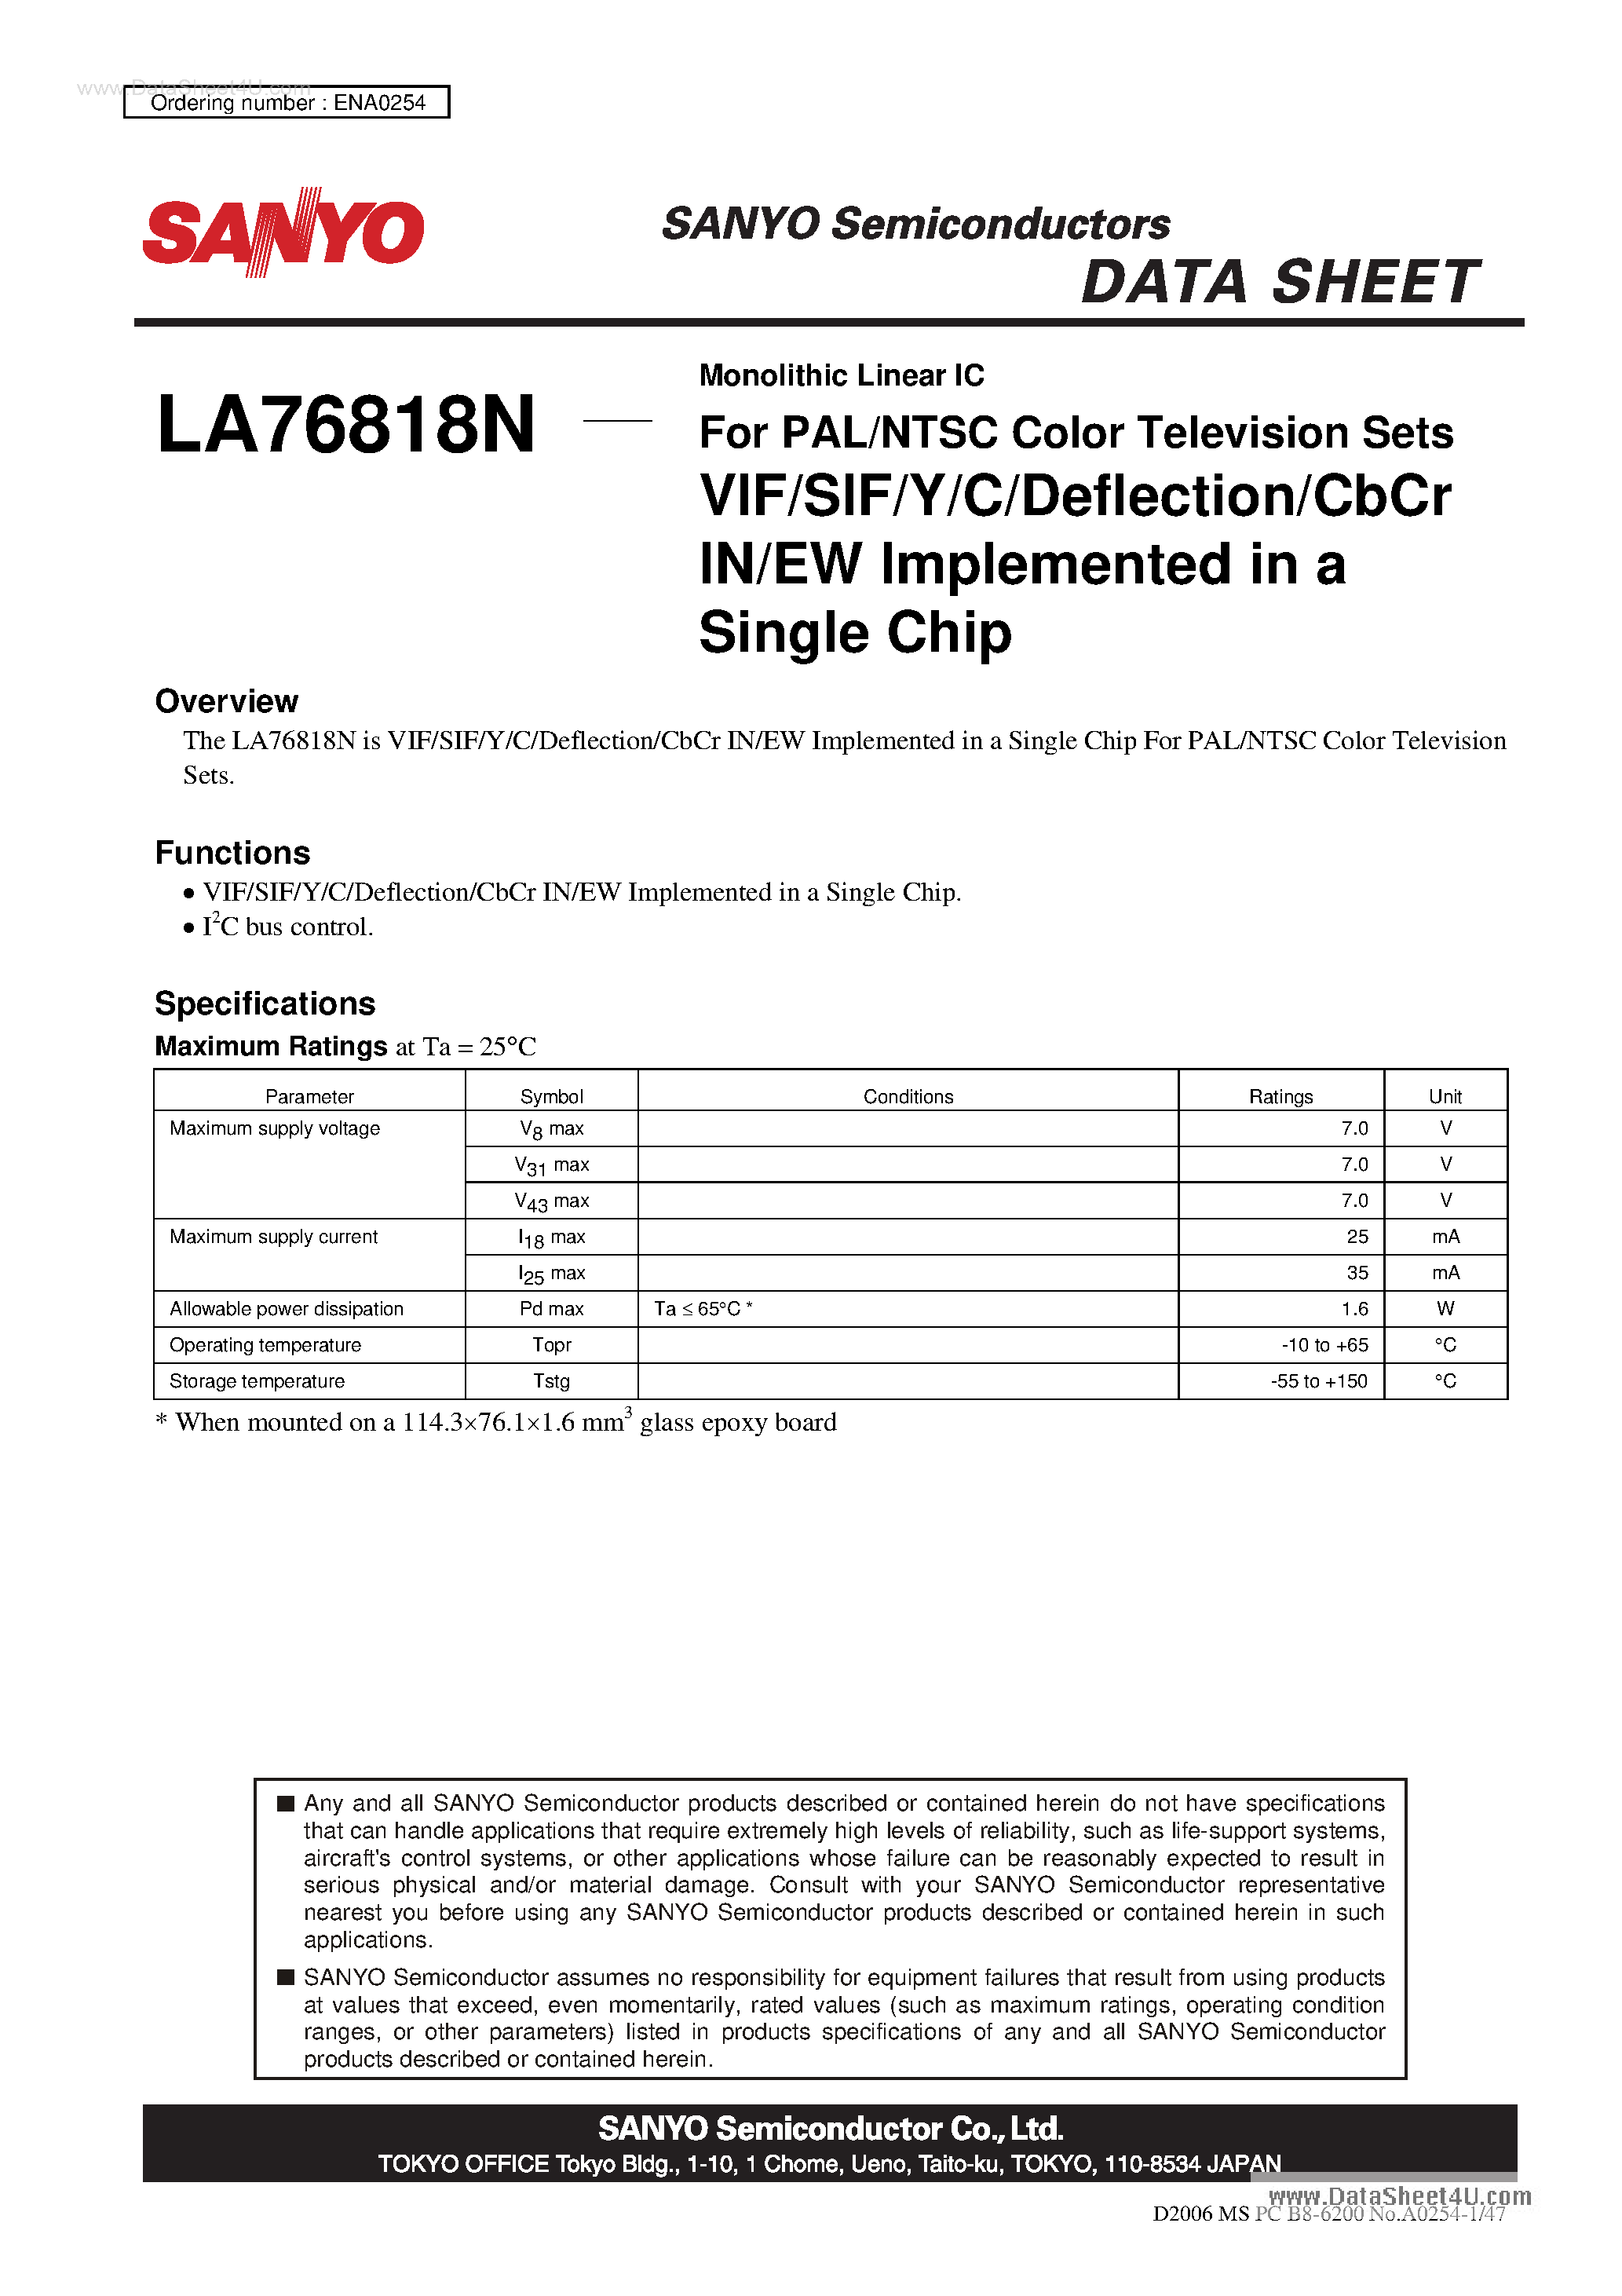 Datasheet LA76818N - VIF/SIF/Y/C/Deflection/CbCr IN/EW Implemented in a Single Chip page 1